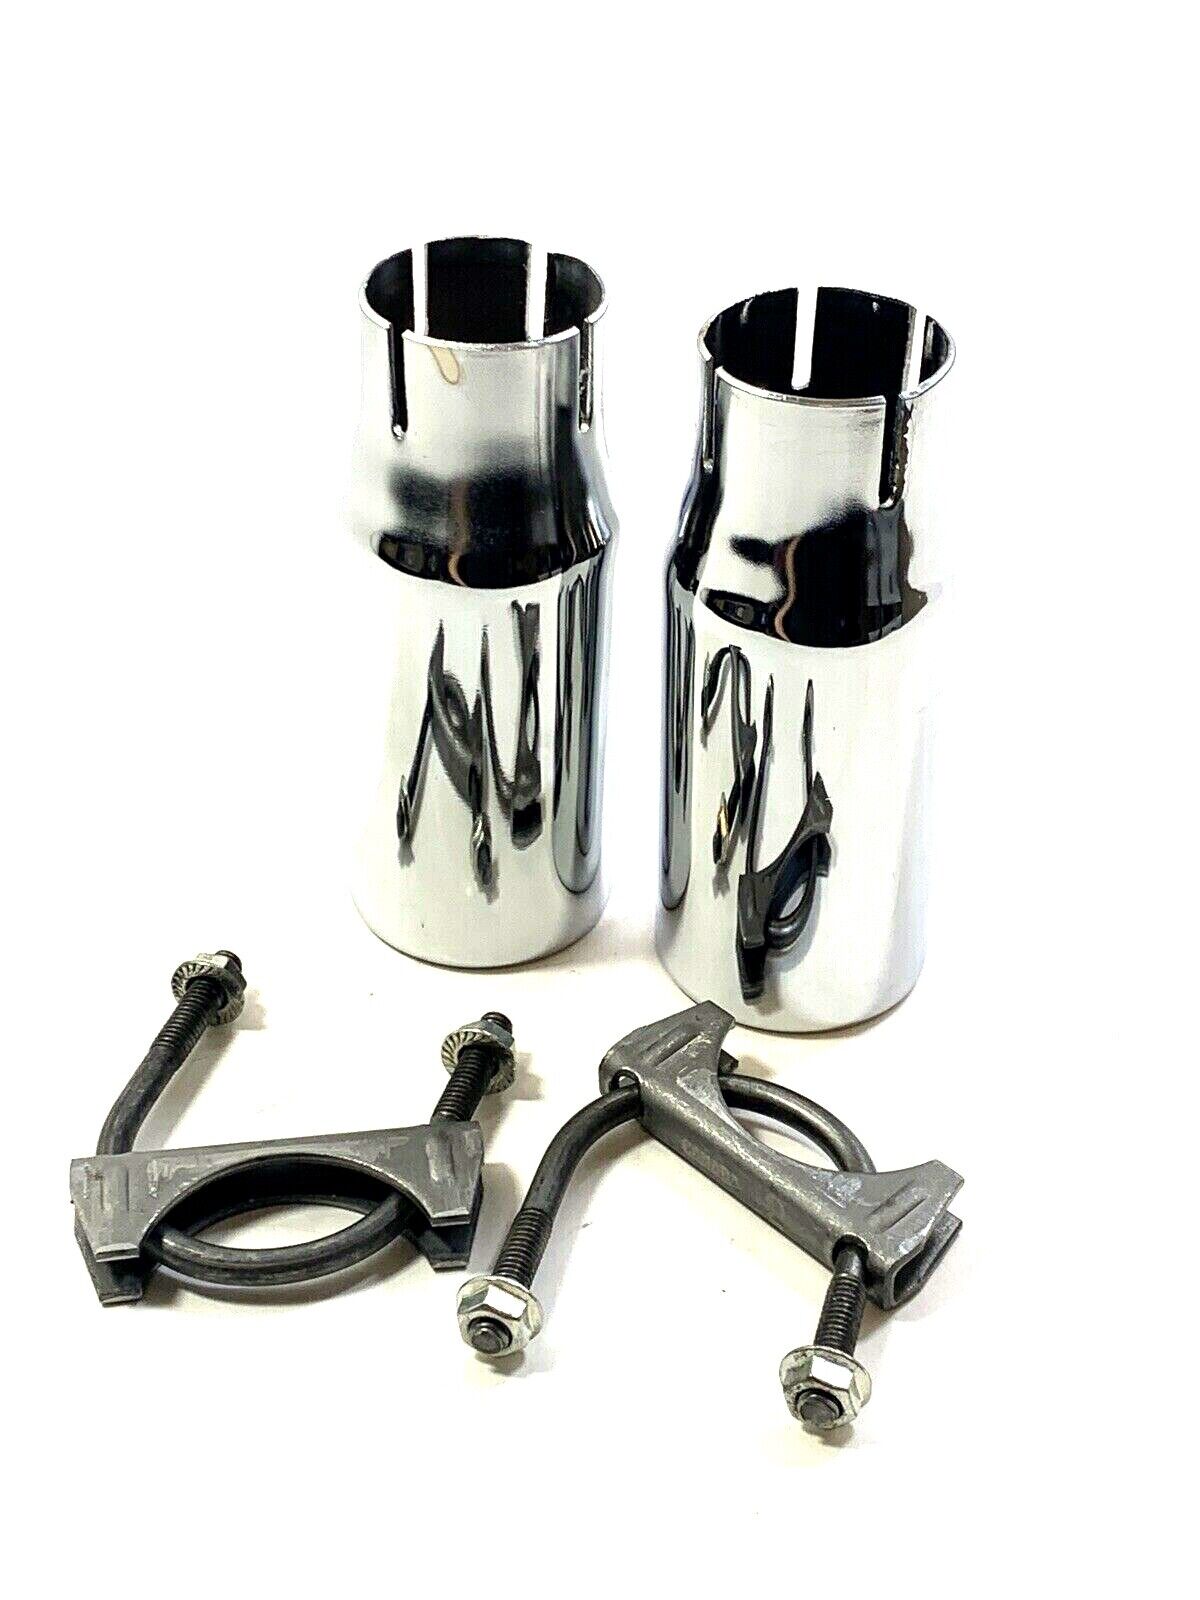 New Chrome Exhaust Extension Tips for Ford Fusion 2003-2009 3D Carbon 691223